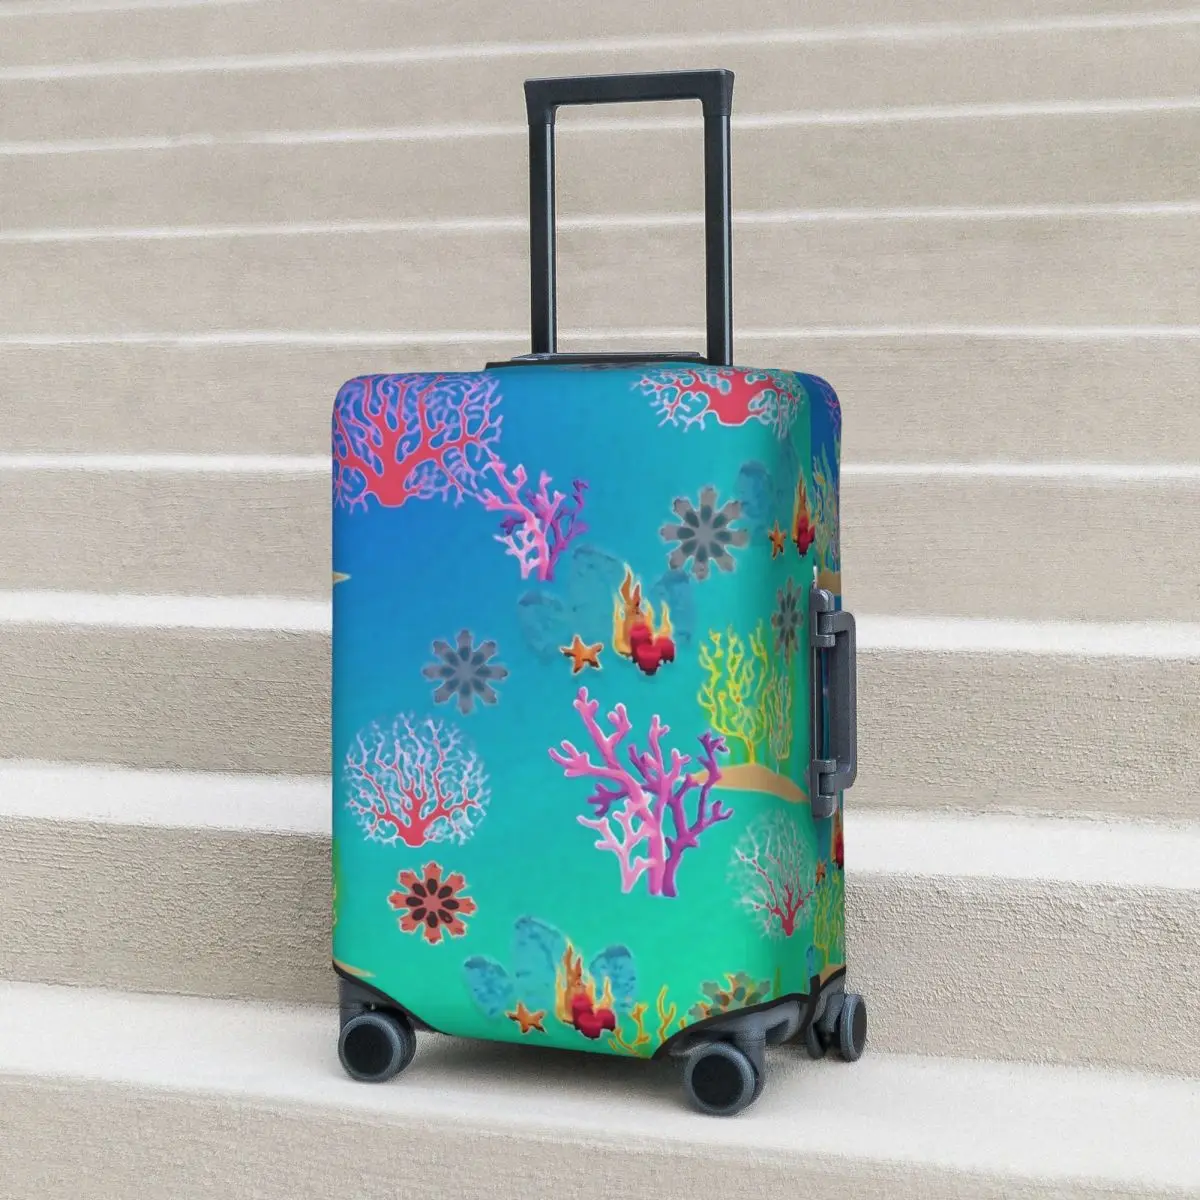 

Tropical Marine Print Suitcase Cover Coral Floral Design Useful Travel Protector Luggage Accesories Holiday